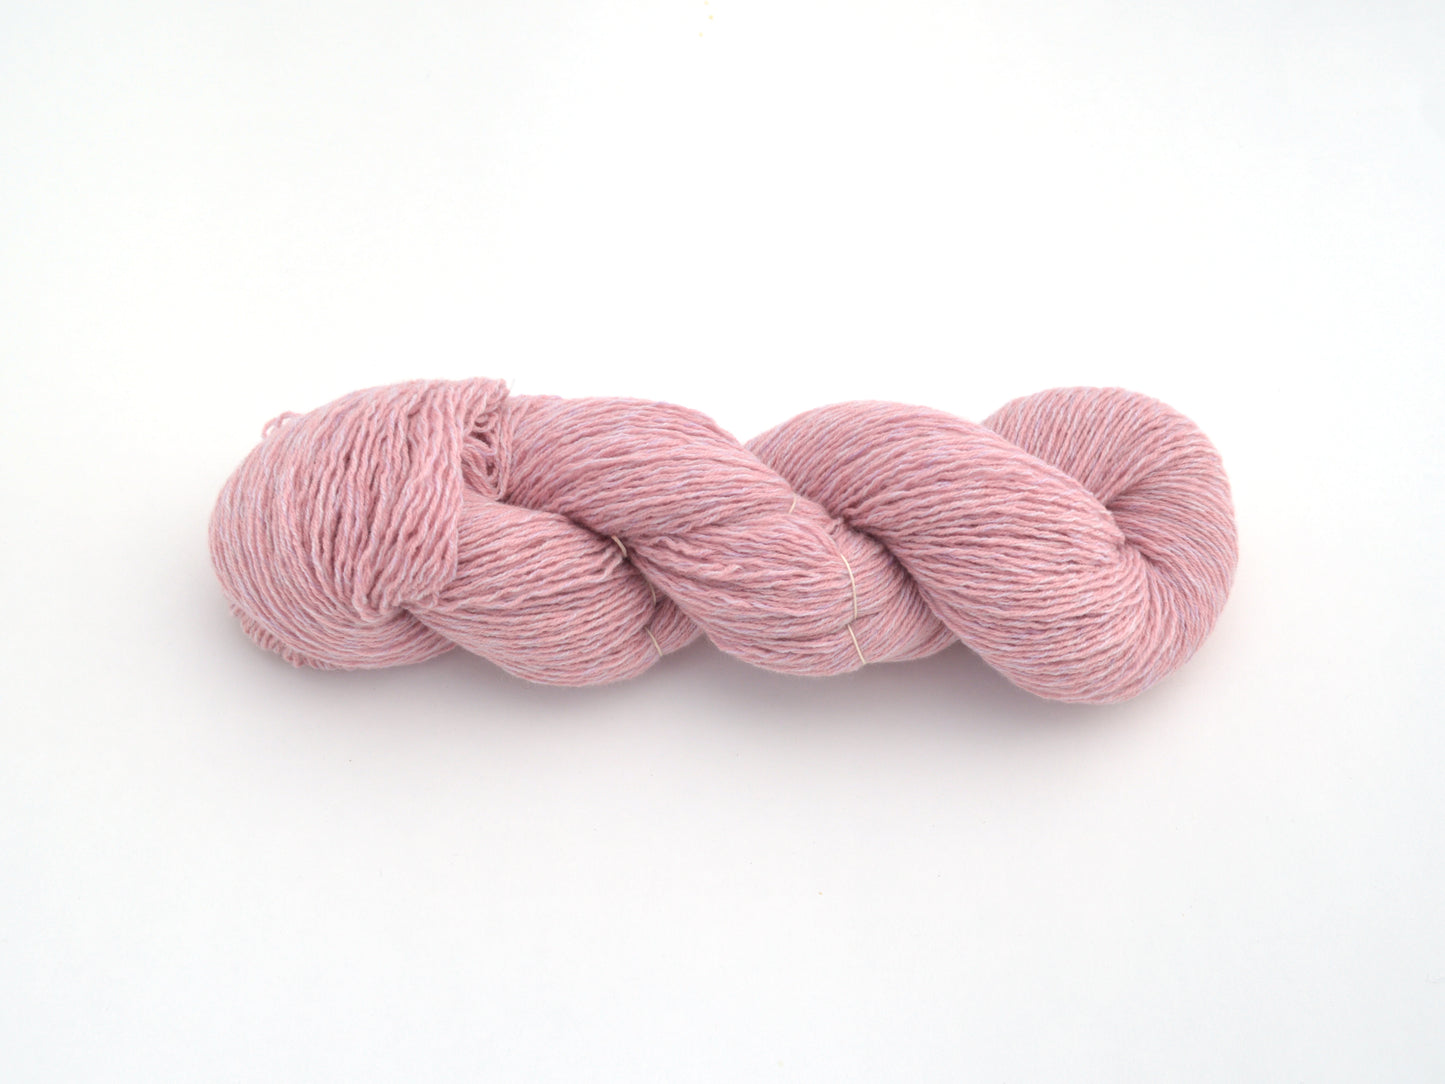 Fingering Weight Recycled Cashmere Yarn in Muted Pink